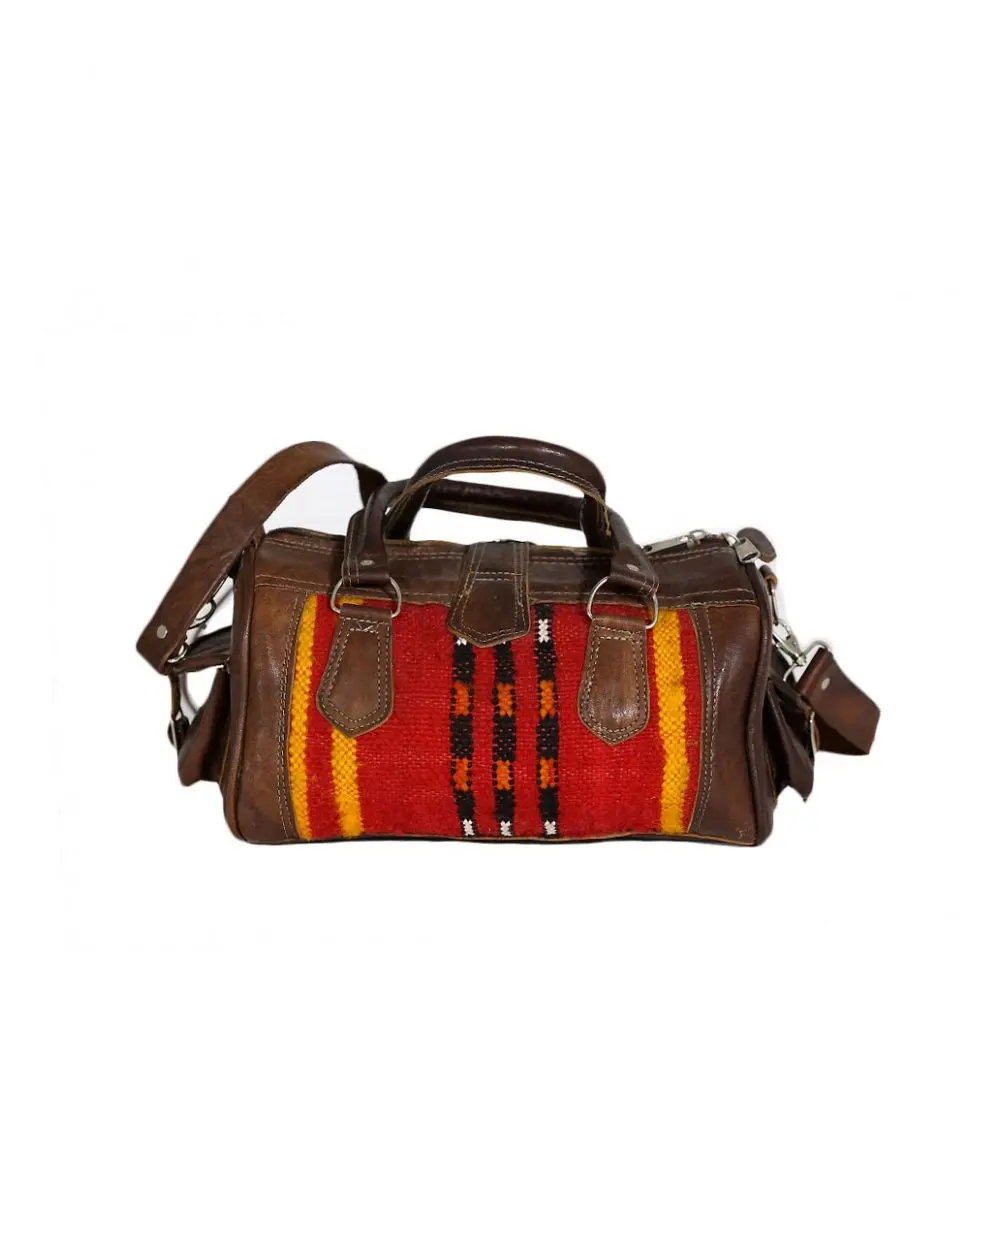 Moroccan Leather And Kilim bag Moroccan leather duffle bag for men & women travel weekend Handmade & hand-wave by our artisans